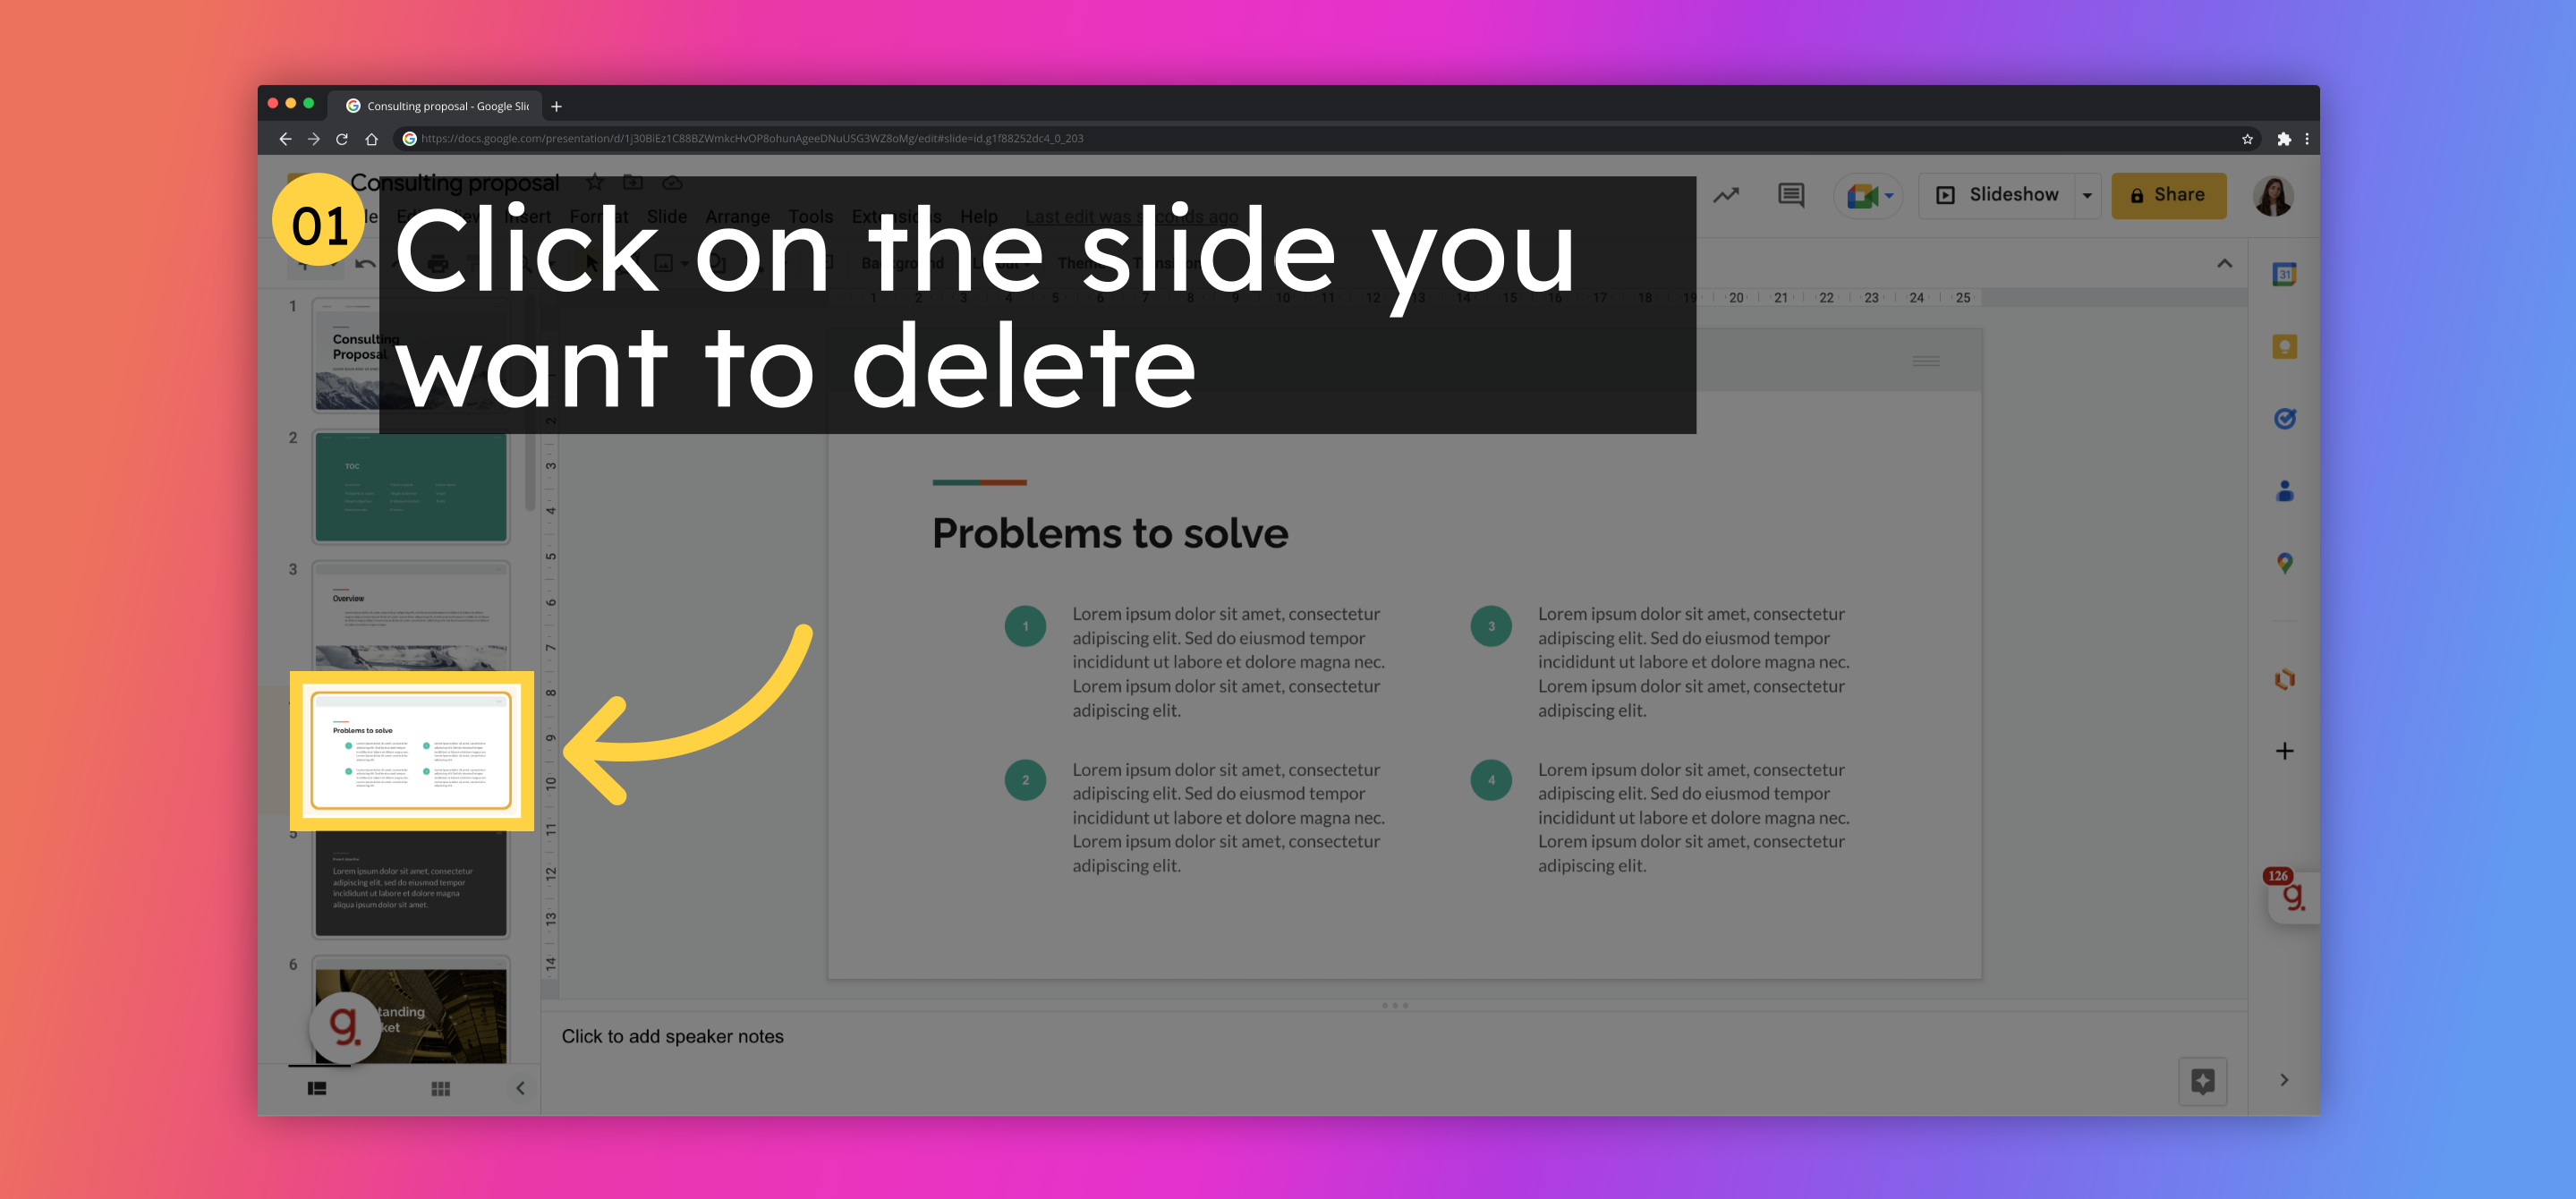 Click on the slide you want to delete